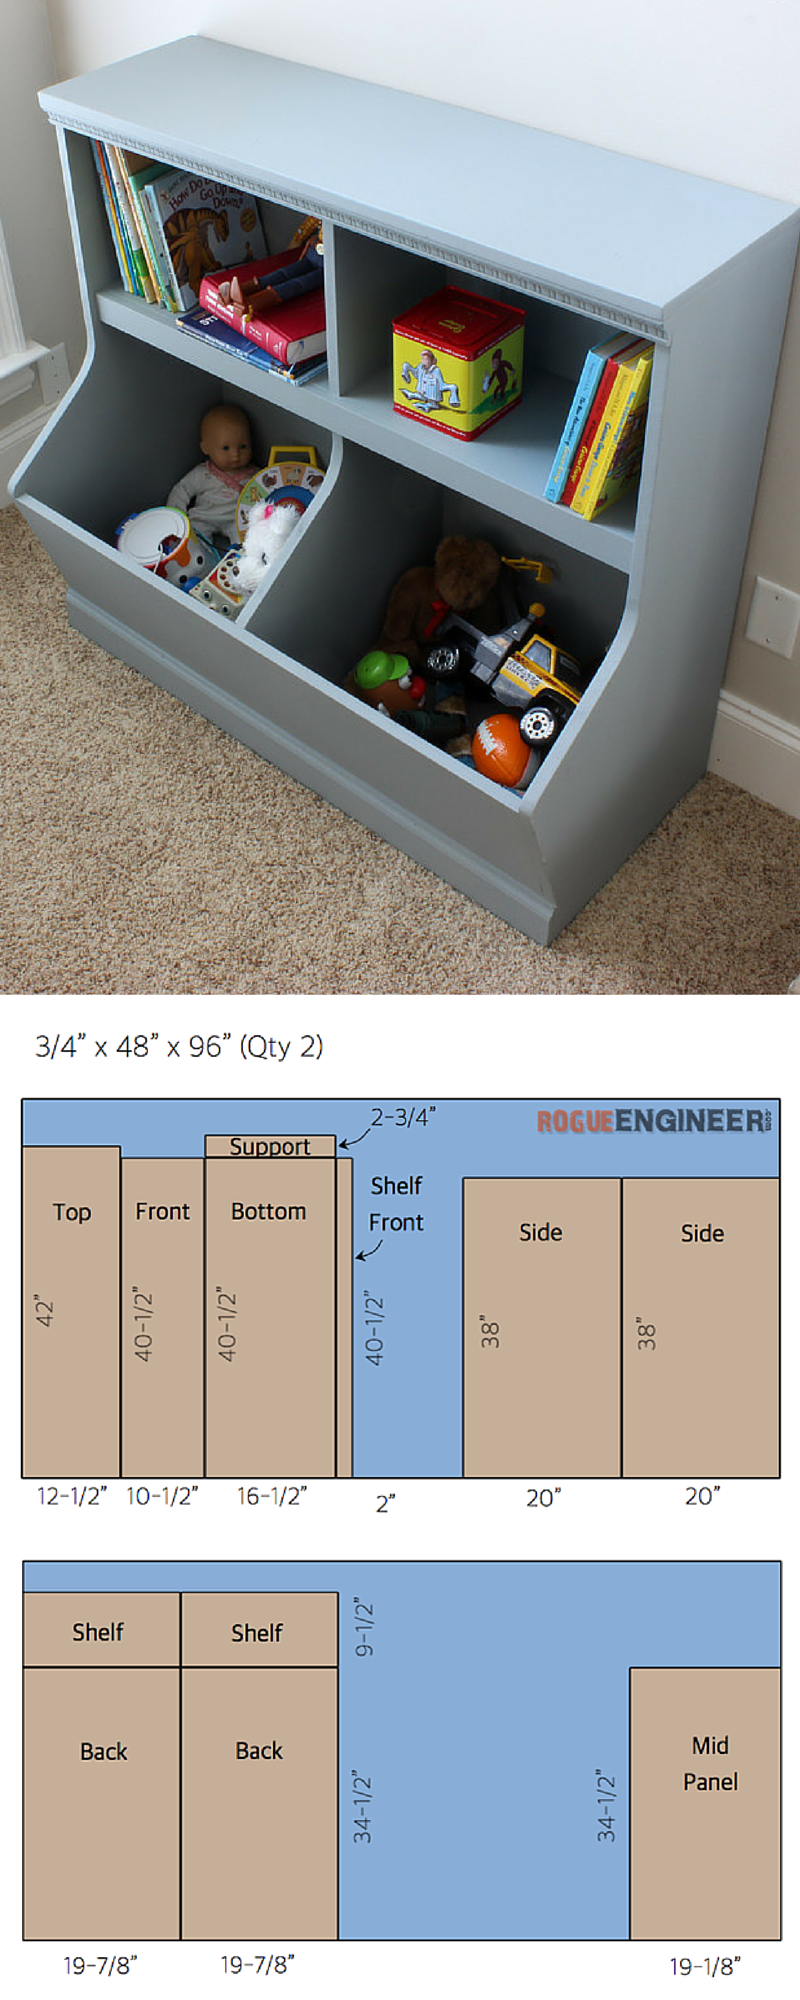 If you have kids, then you know how important storage is! This ?#?DIY? wall unit provides a bookshelf and divided bins to store toys. FREE PLANS from @rogue_engineer at buildsomething.com -   23 diy bookshelf storage
 ideas